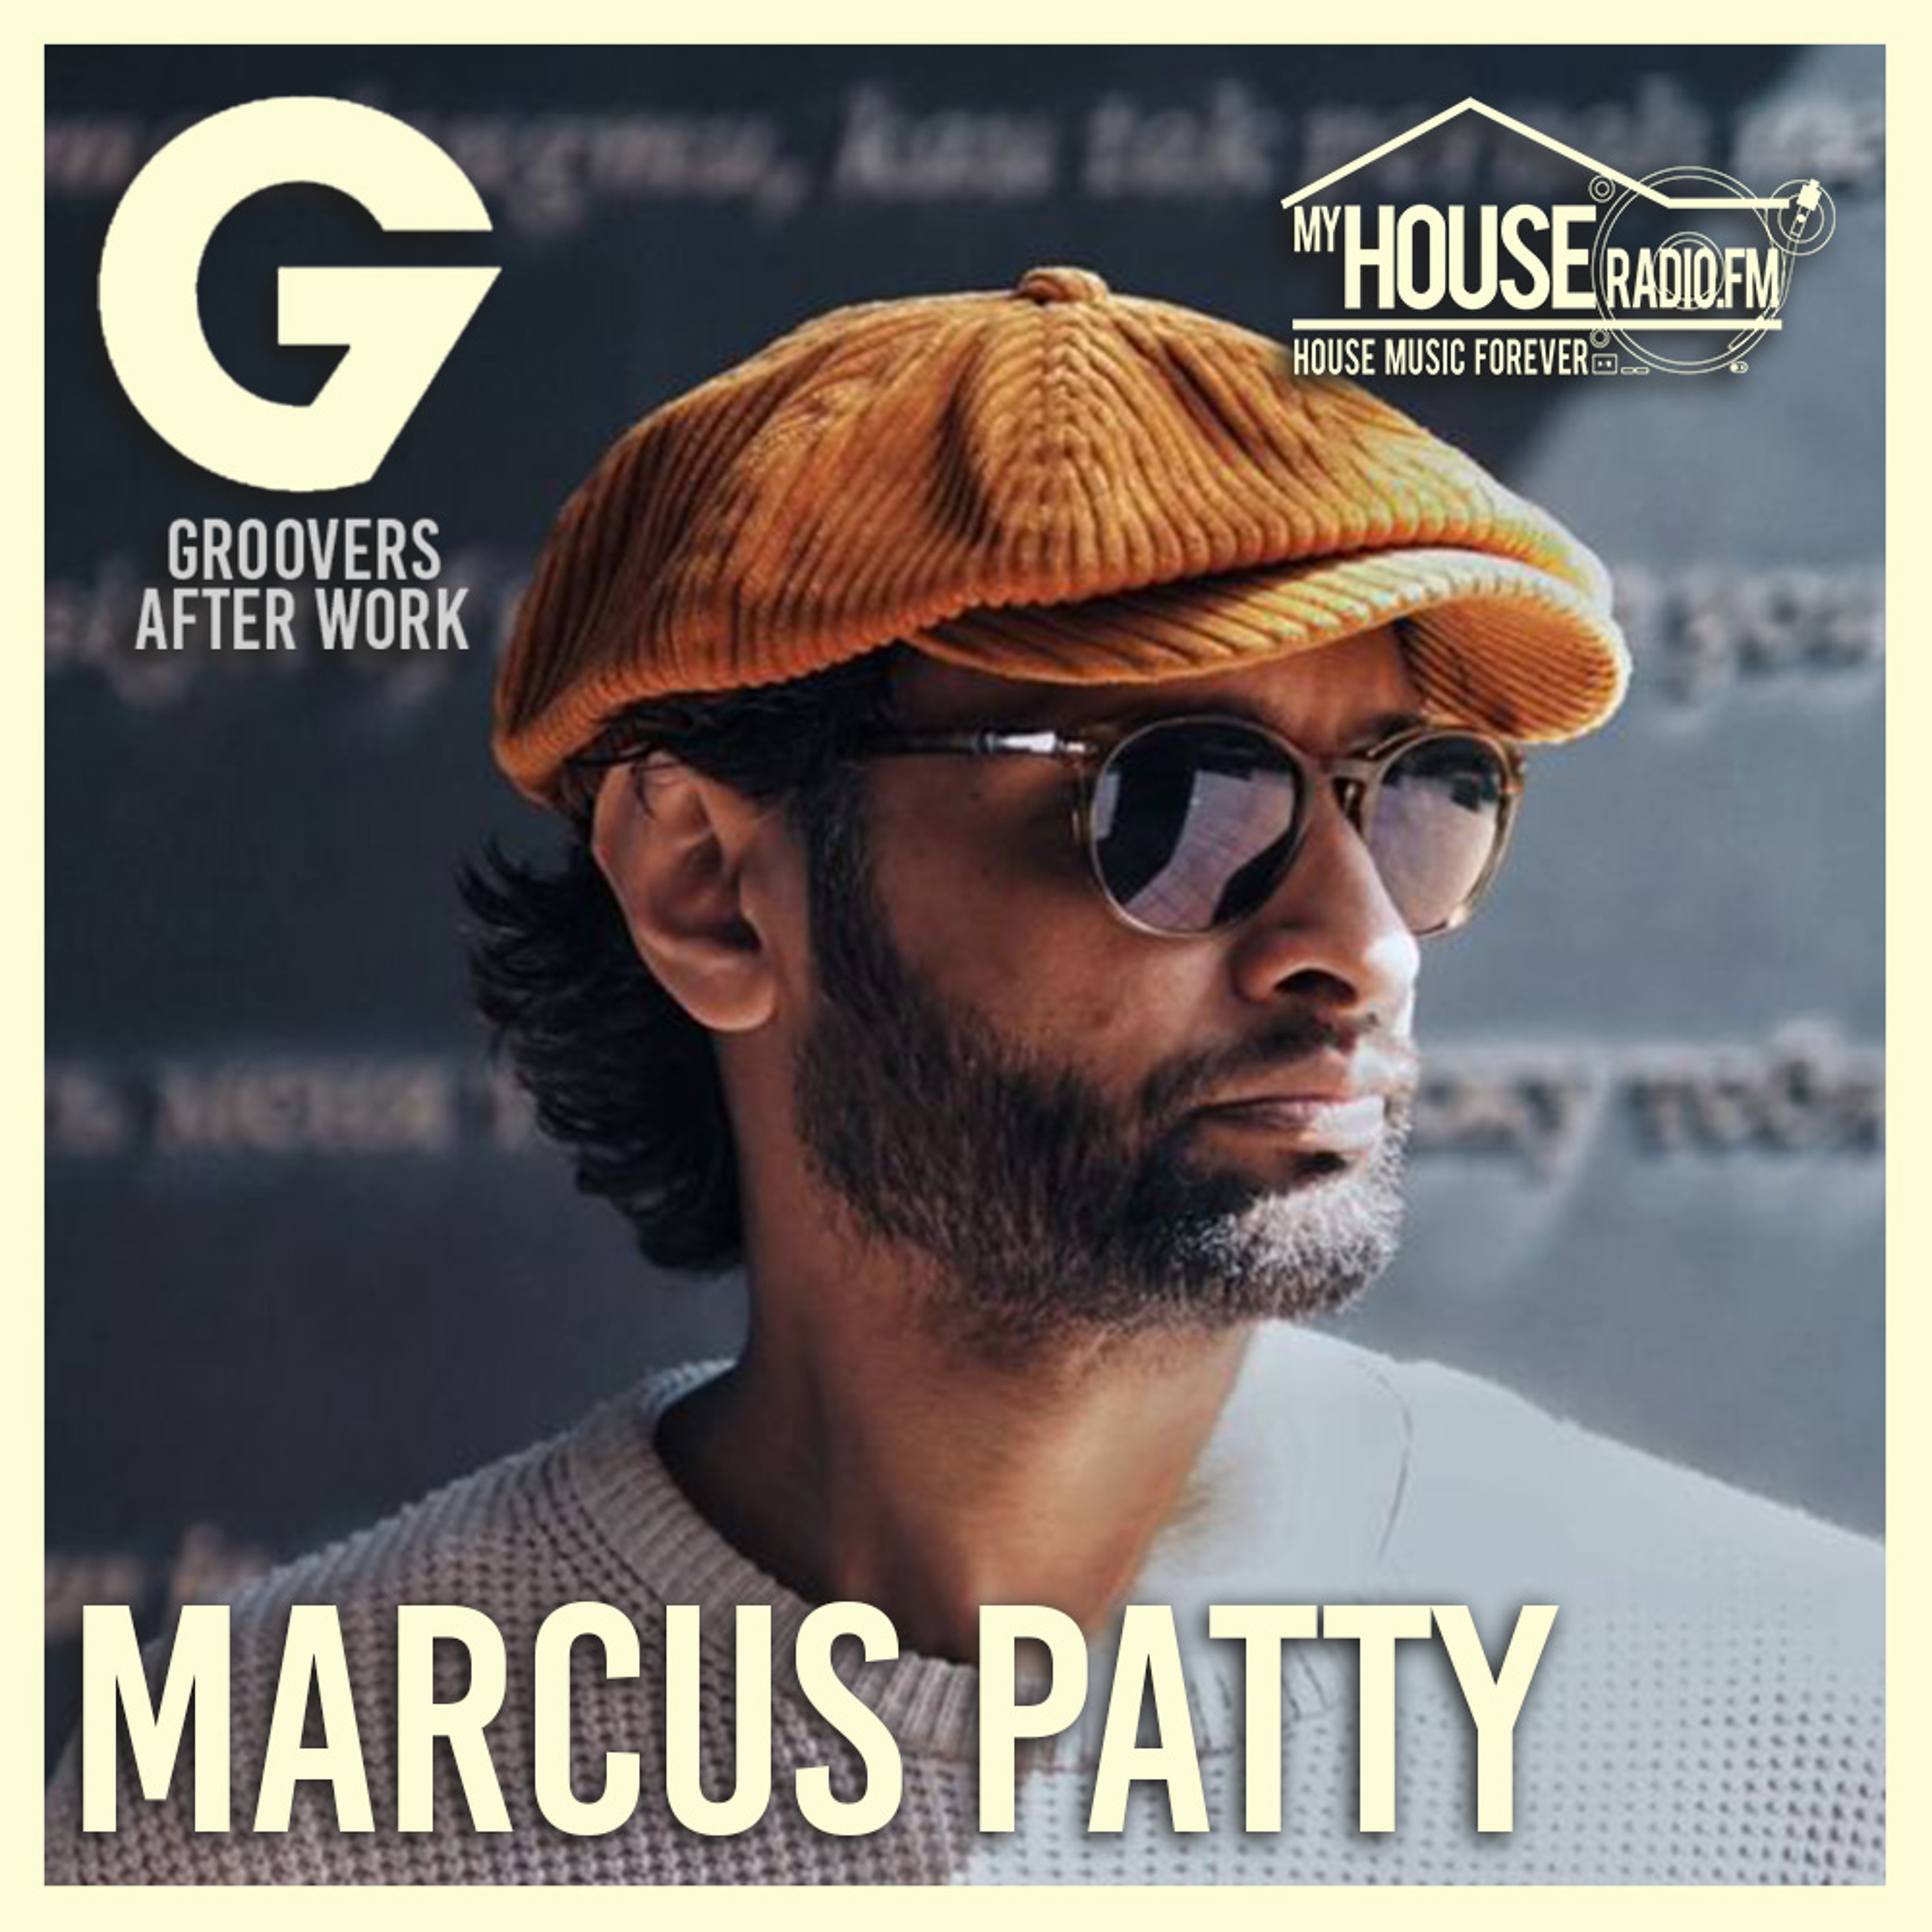 23#16-1 After Work On My House Radio By Marcus Patty